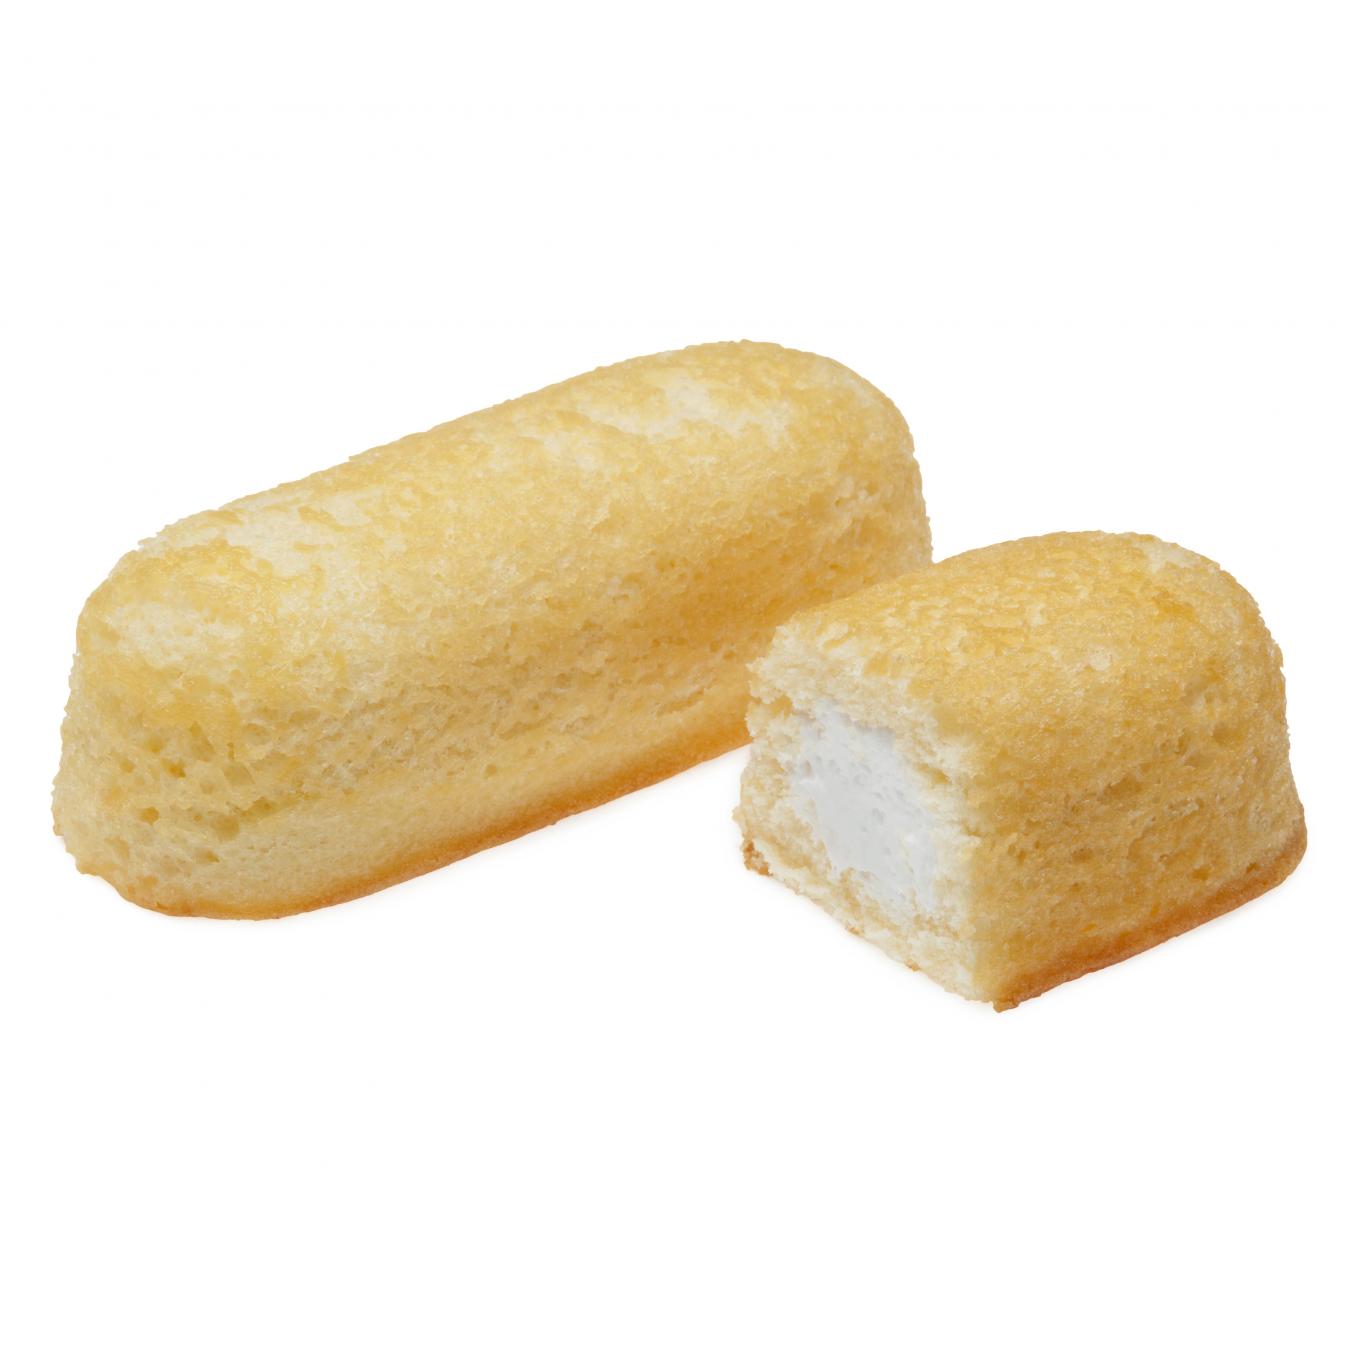 Oh, yellow spongy vanilla-filled goodness! 